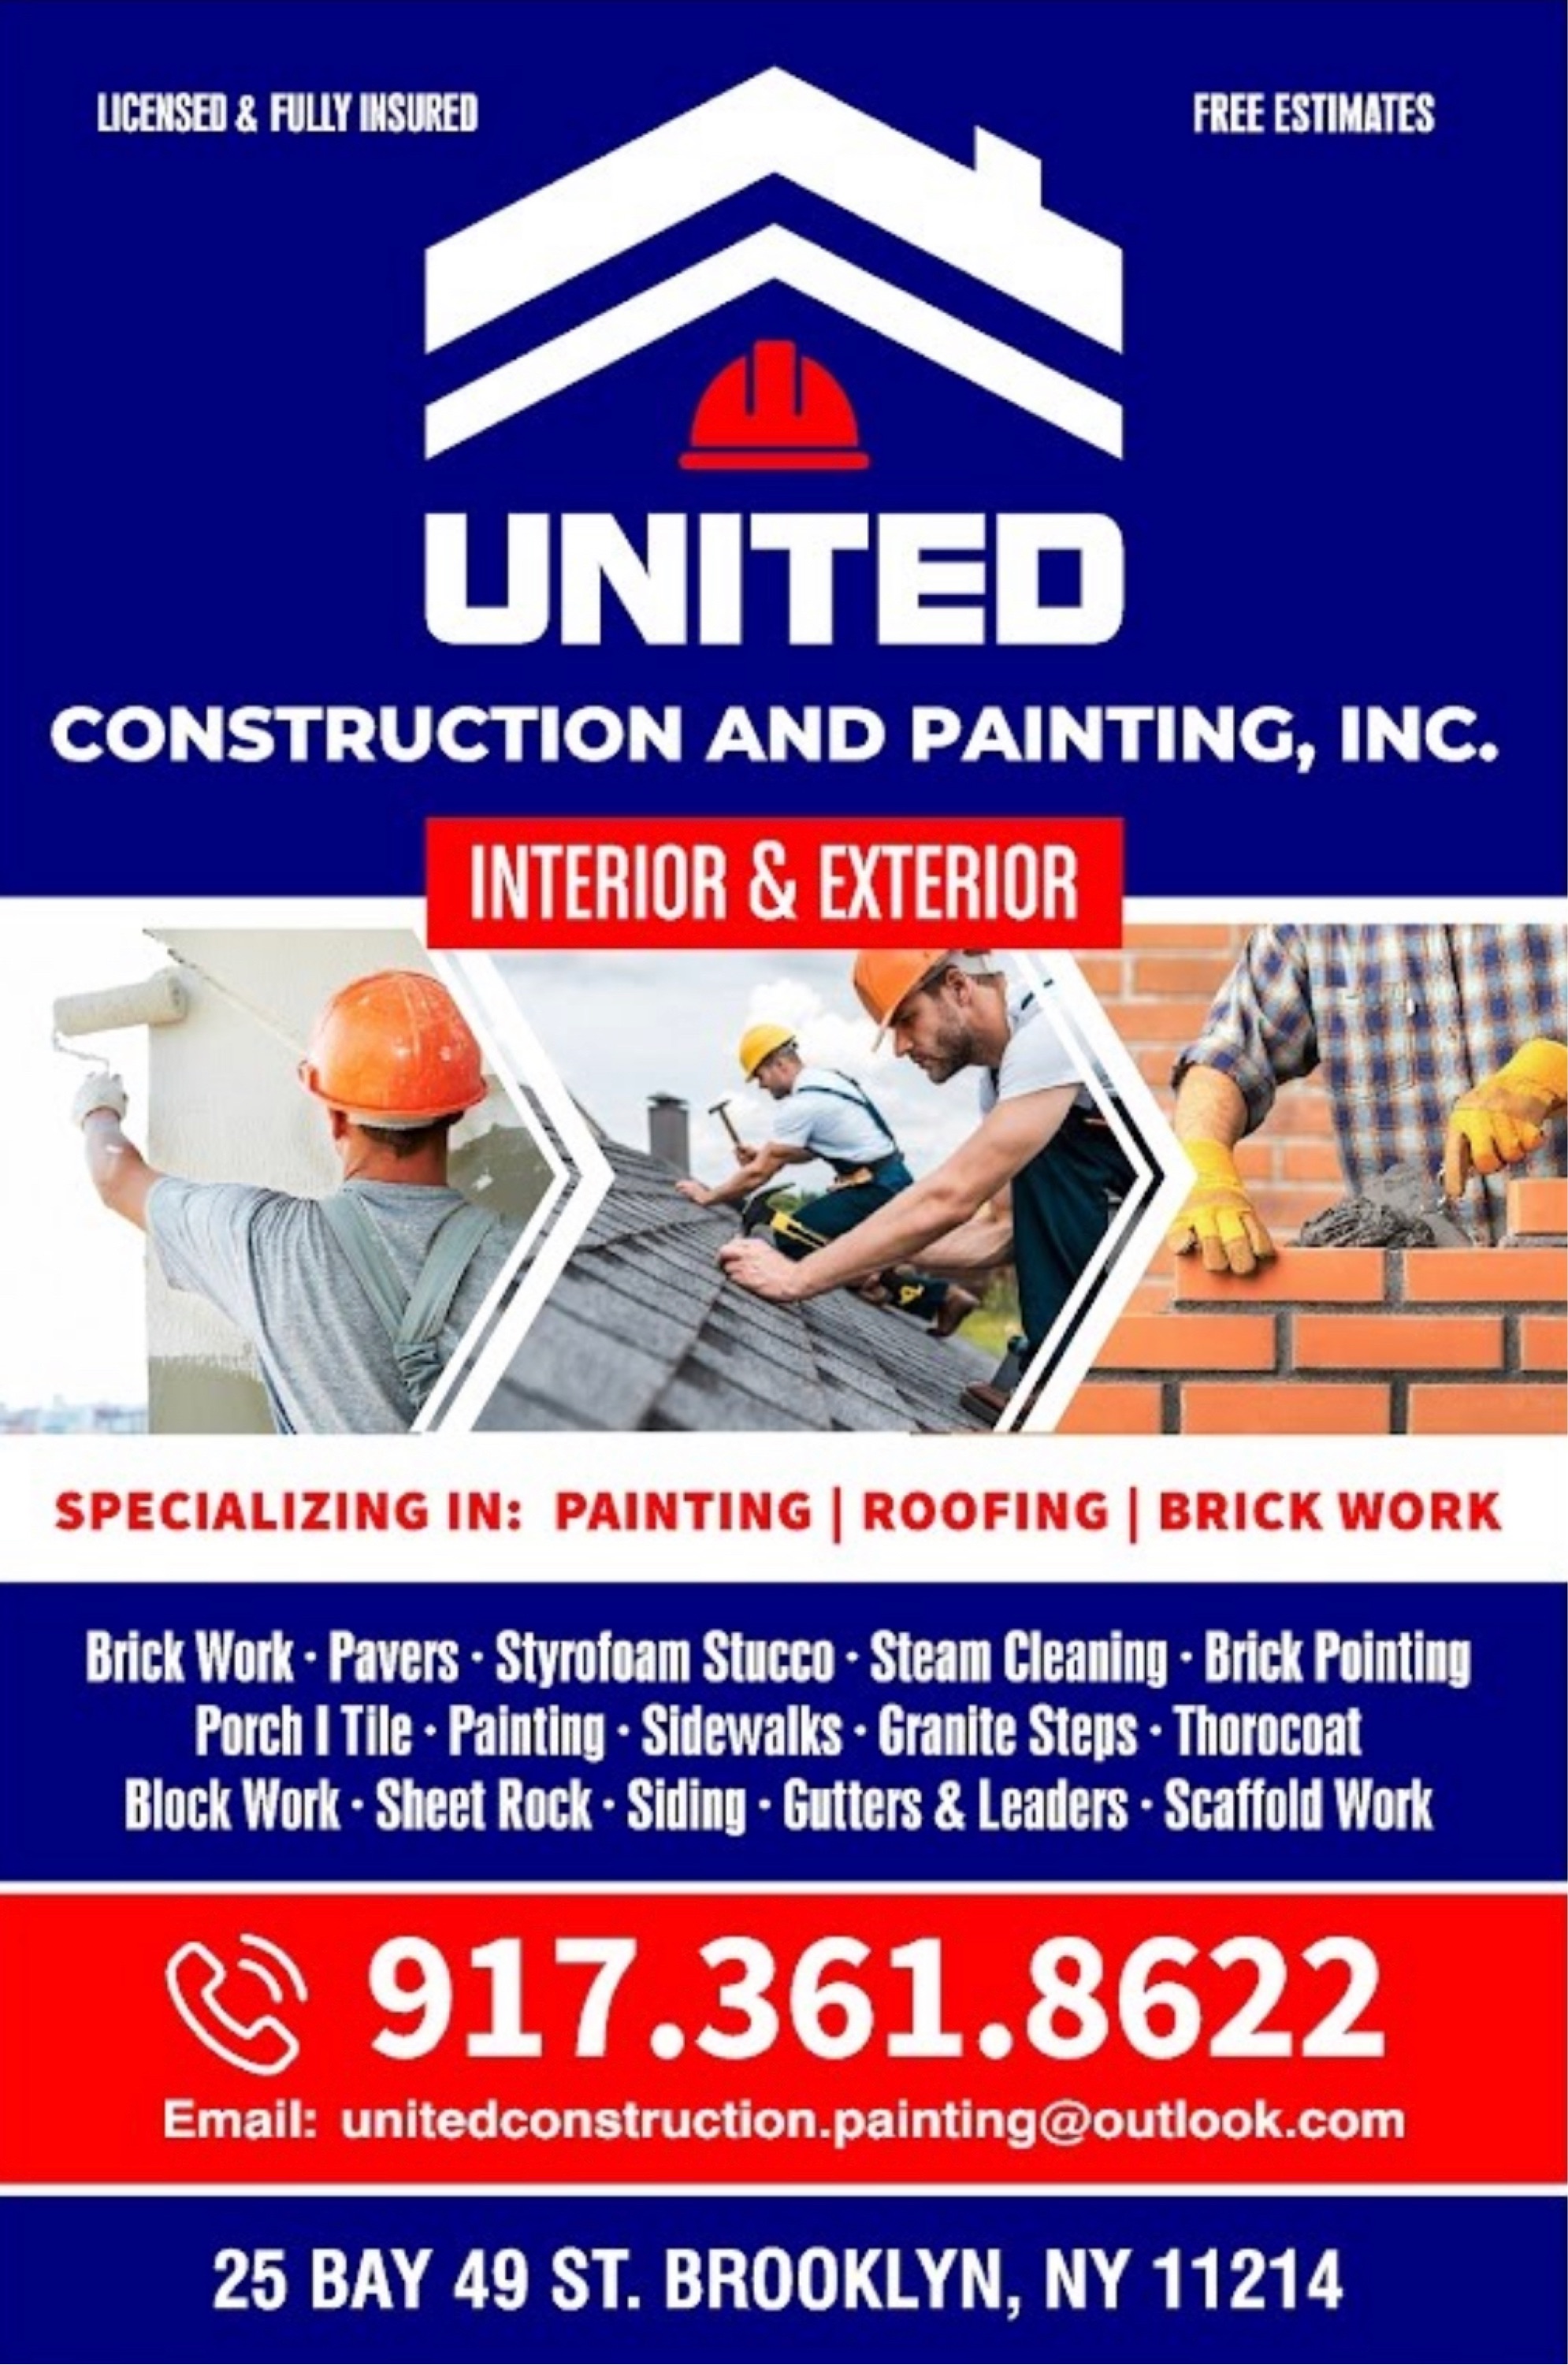 United Construction and Painting, Inc. Logo